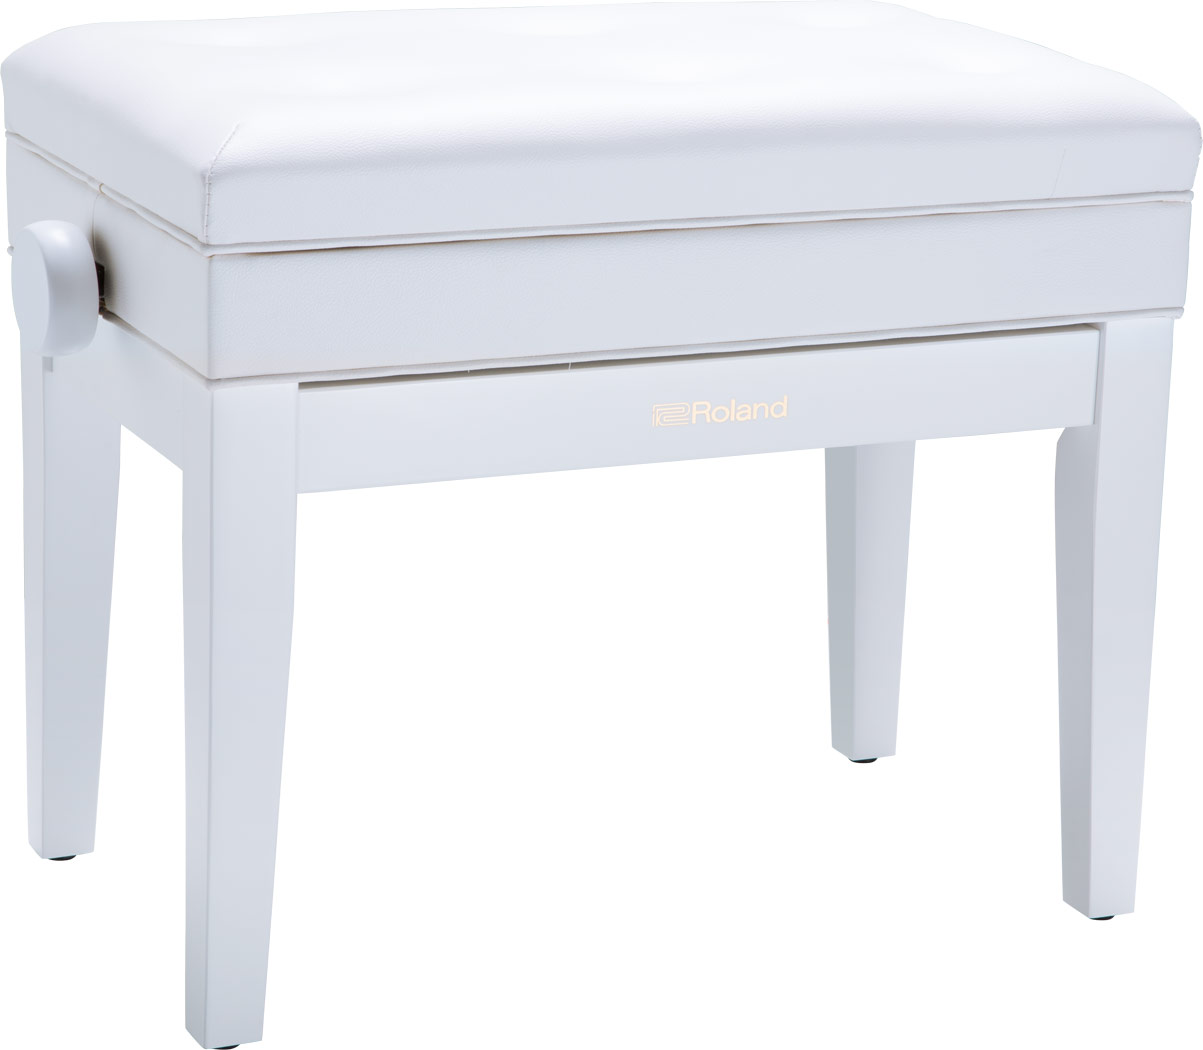 Roland piano bench with adjustable cushioned seat and storage compartment - RPB-400WH